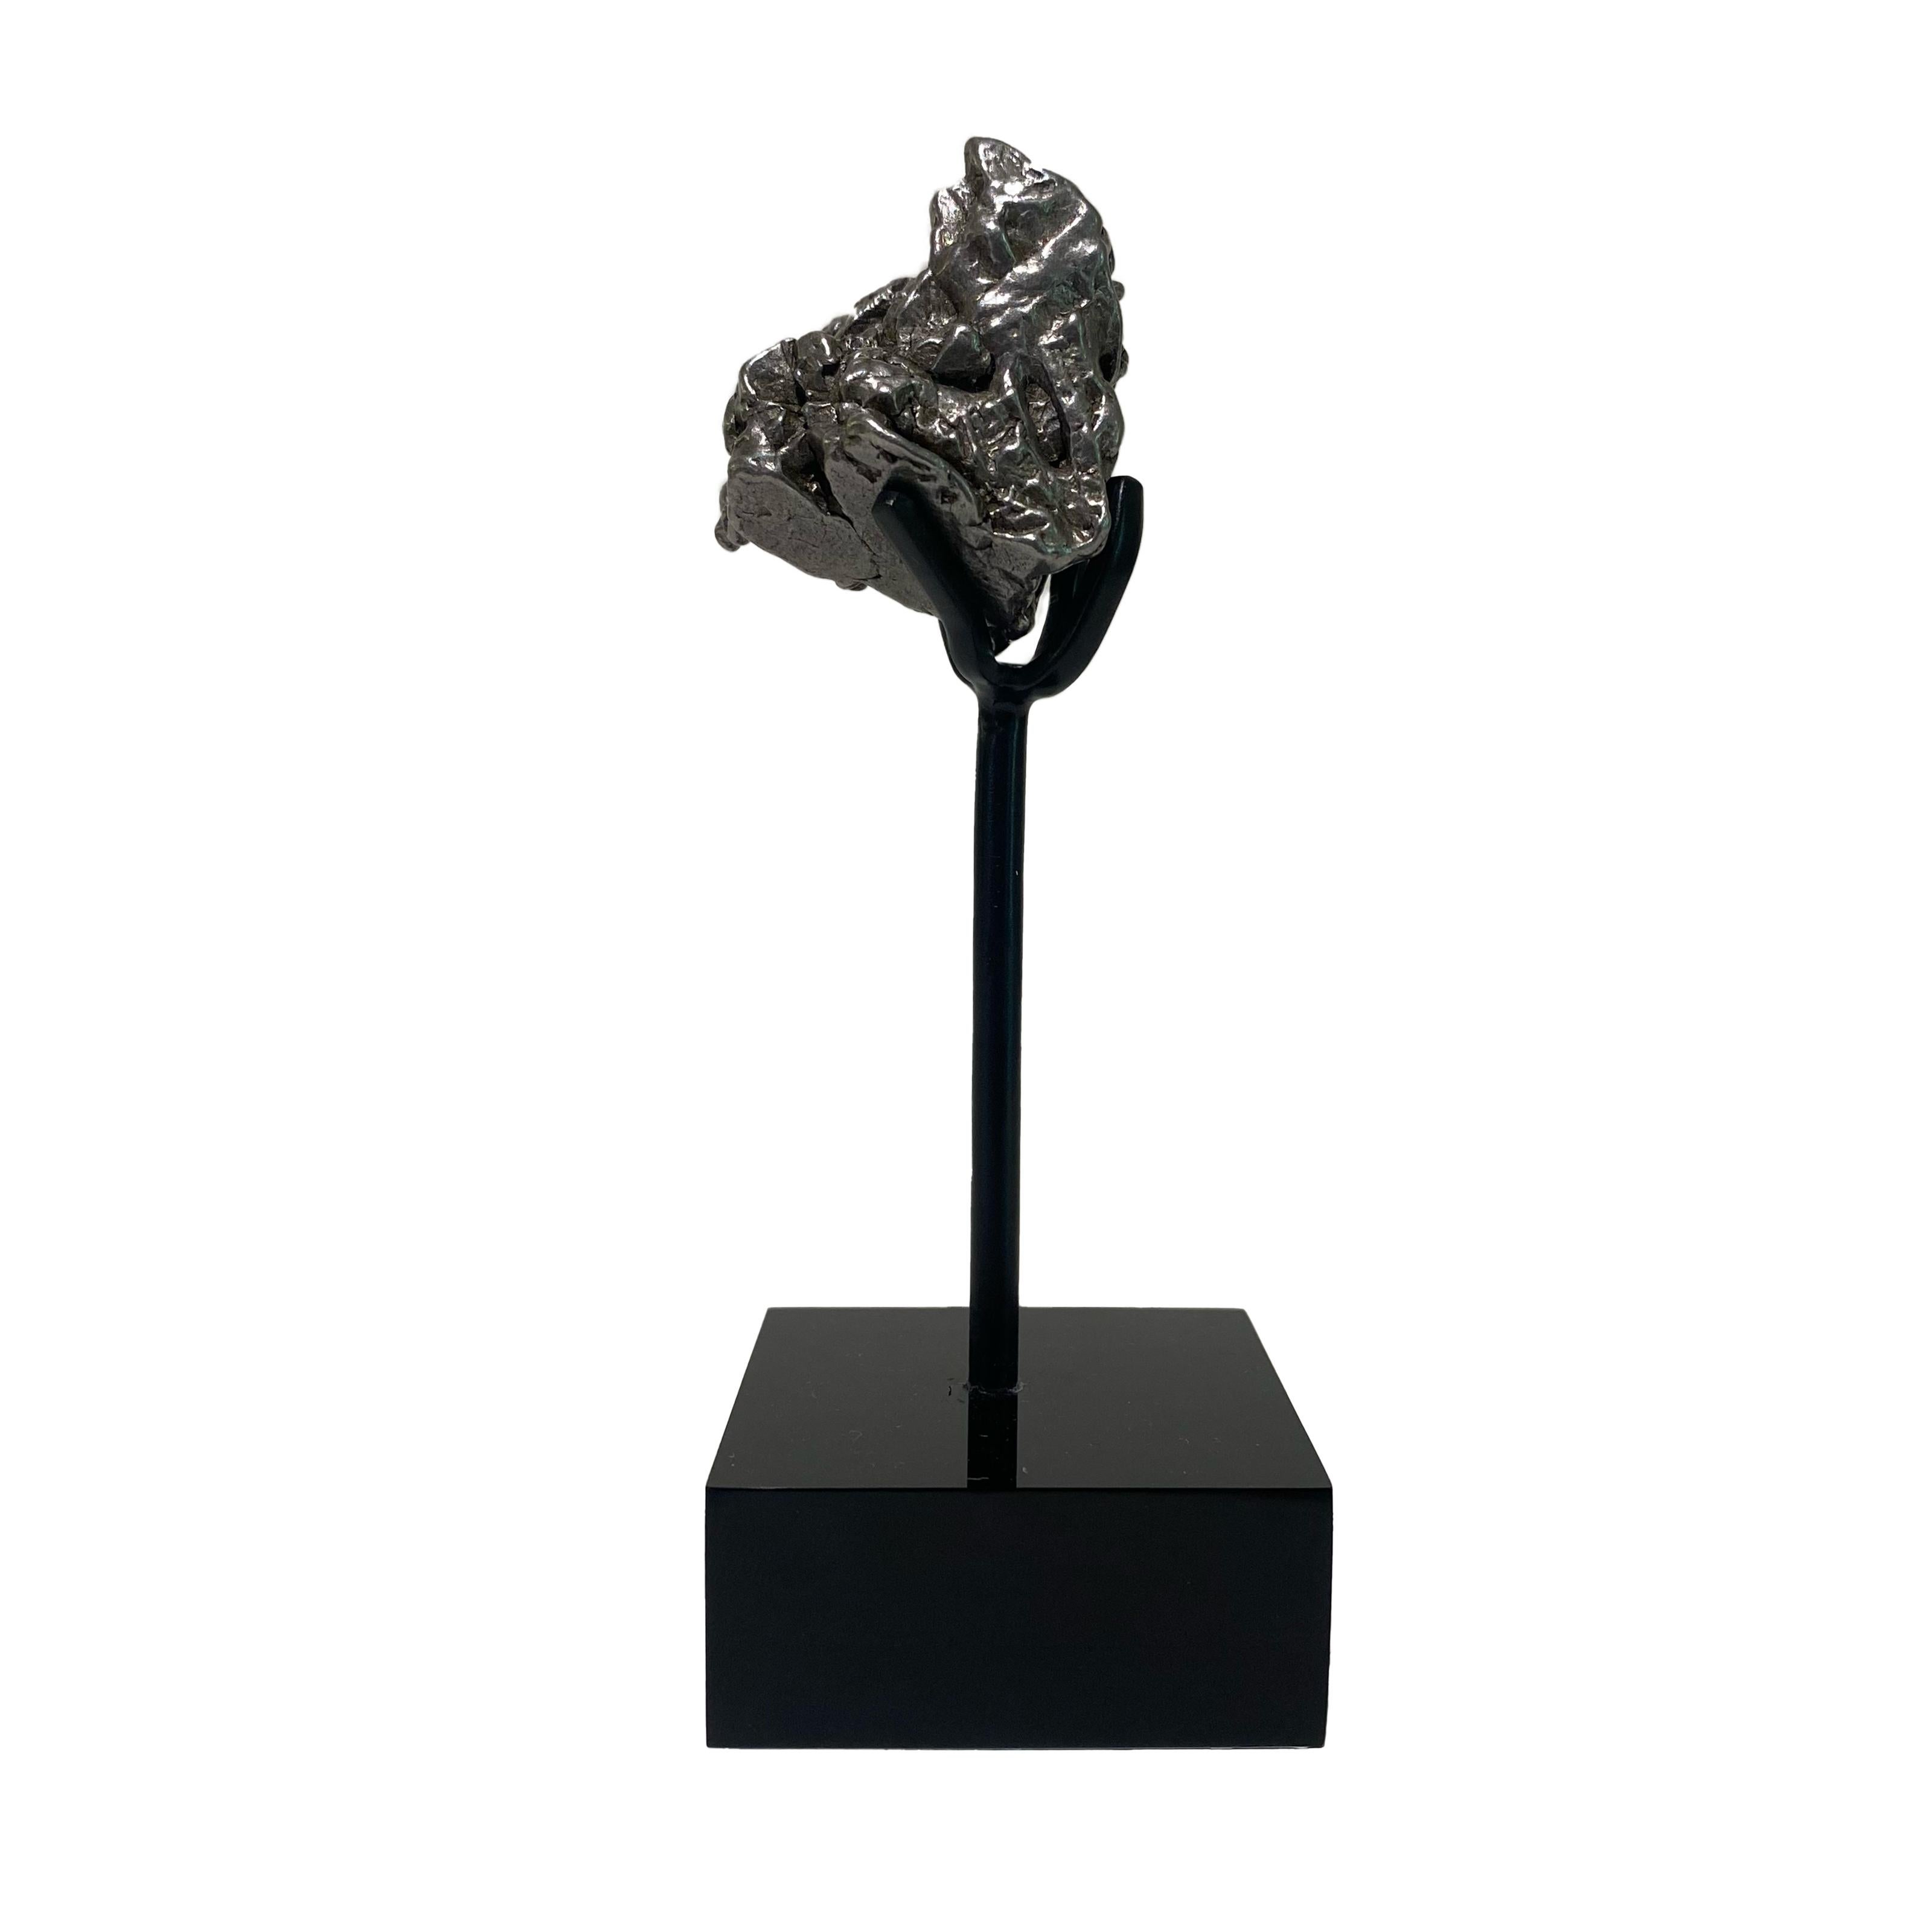 Campo del Cielo Space Rock

Approximately 4.5 billion years old
13 x 3.5 x 4.5 cm
Buenos Aires, Argentina
Bespoke stand included

Campo del Cielo (‘Valley of the Sky’) meteorites formed as the result of two asteroids colliding at cosmic velocity in